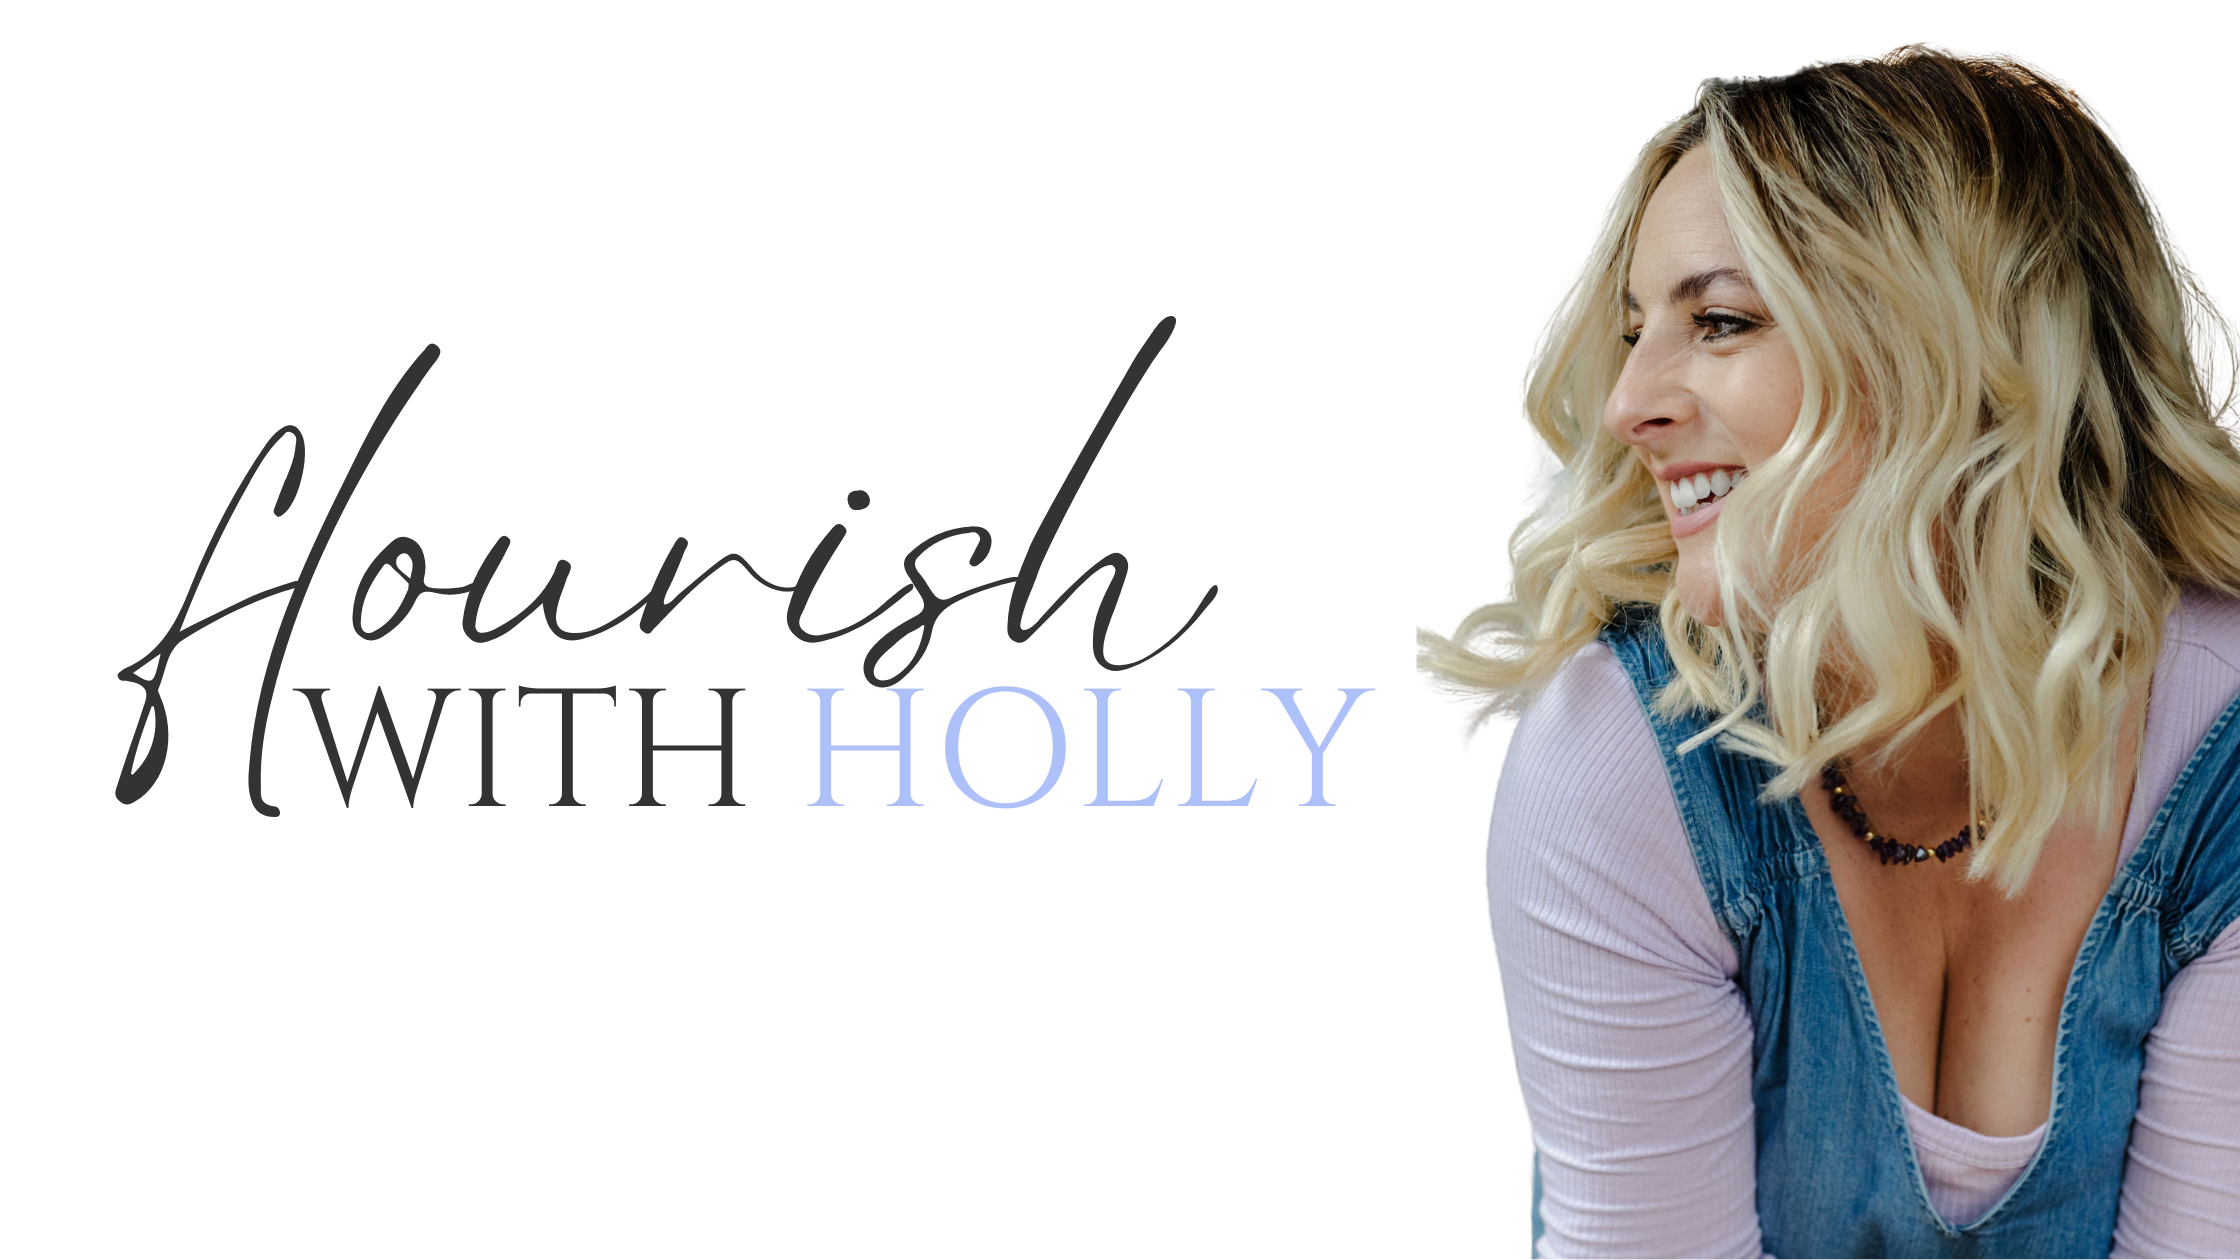 flourish with holly blog - Holly Wood laughing with head turned